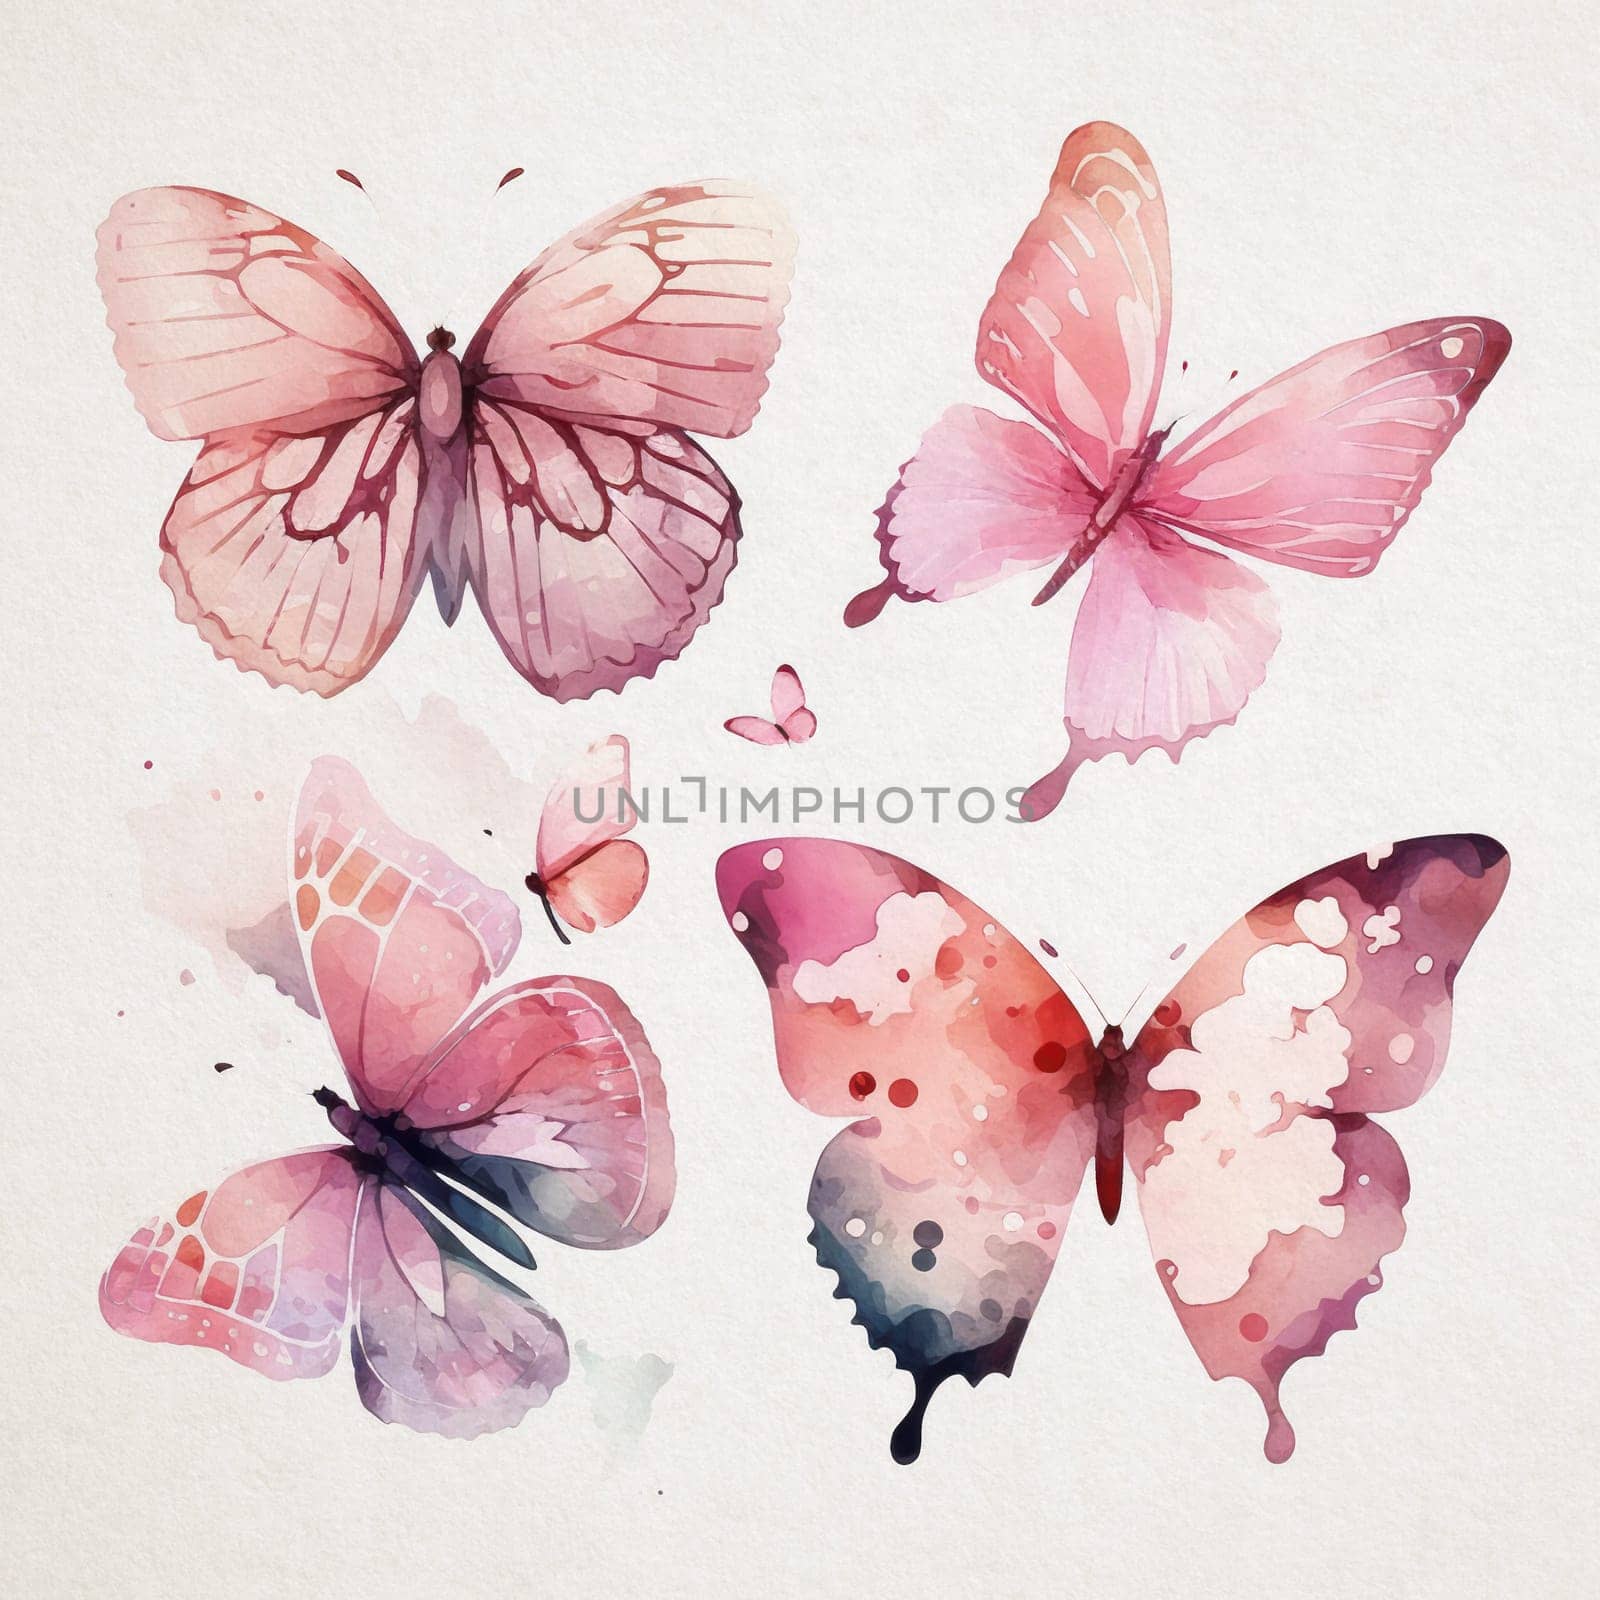 Collection of watercolor butterflies in shades of pink on a white paper background download image